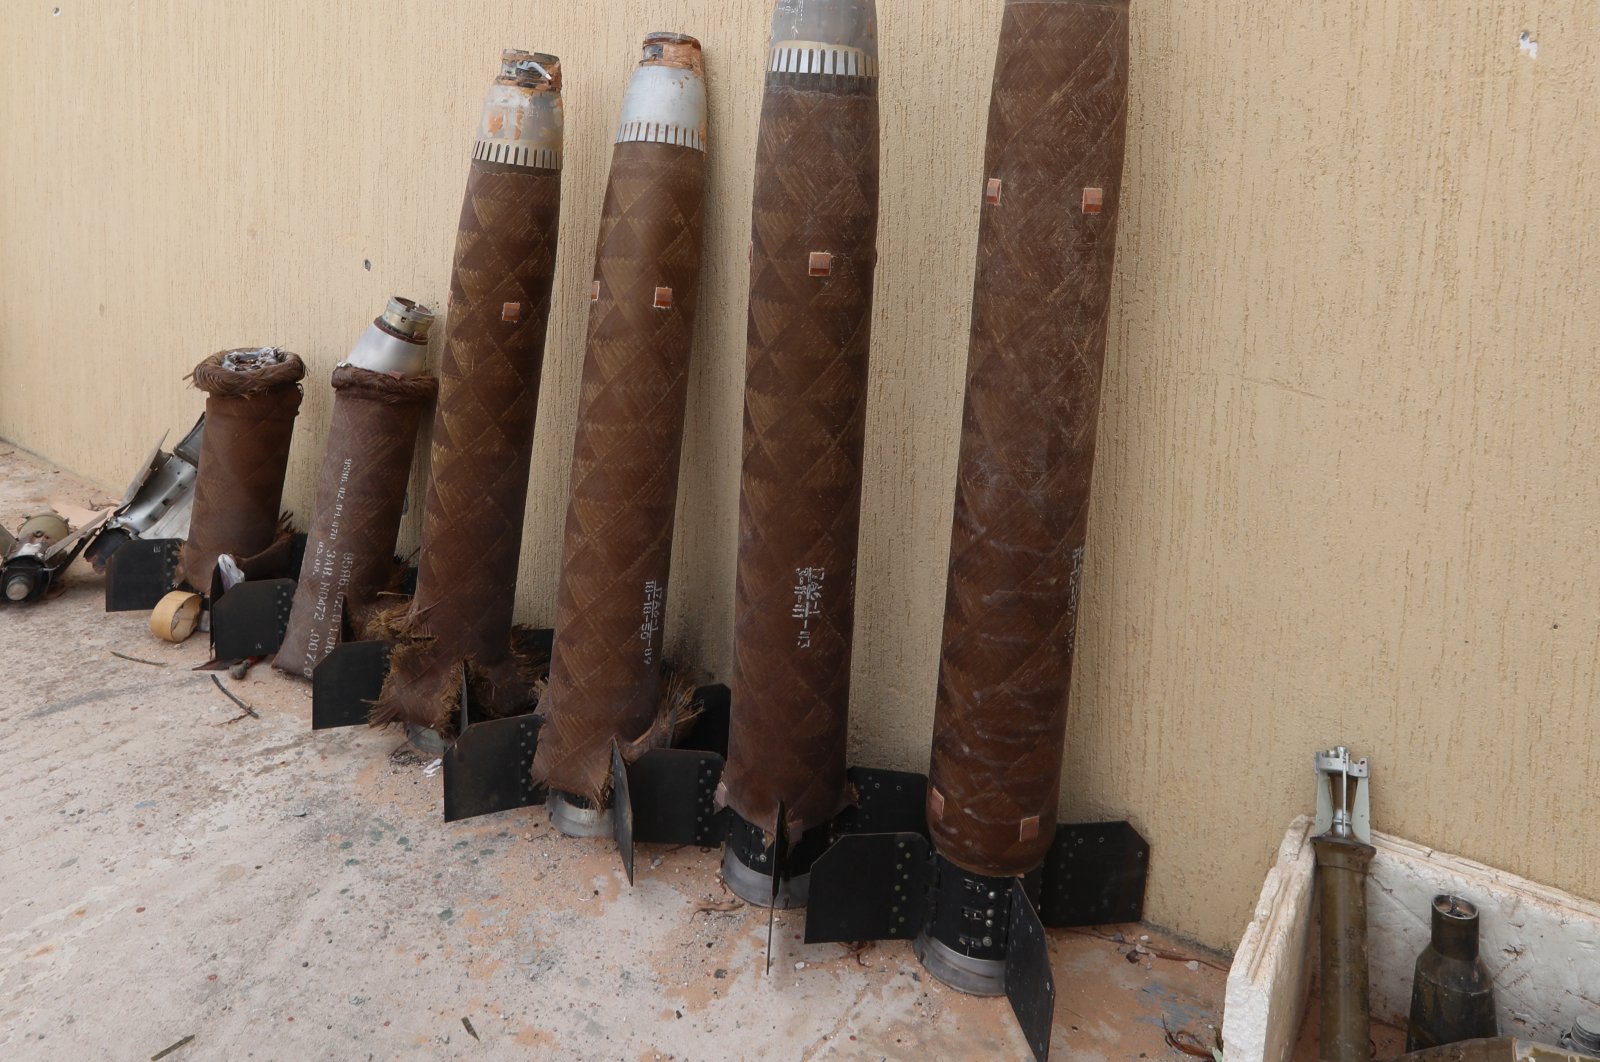 The Libyan Army discovered 22 tons of ammunition belonging to forces loyal to putschist Gen. Khalifa Haftar in areas near the capital Tripoli after driving Haftar's militias away, Libya, Oct. 13, 2020. (AA Photo)